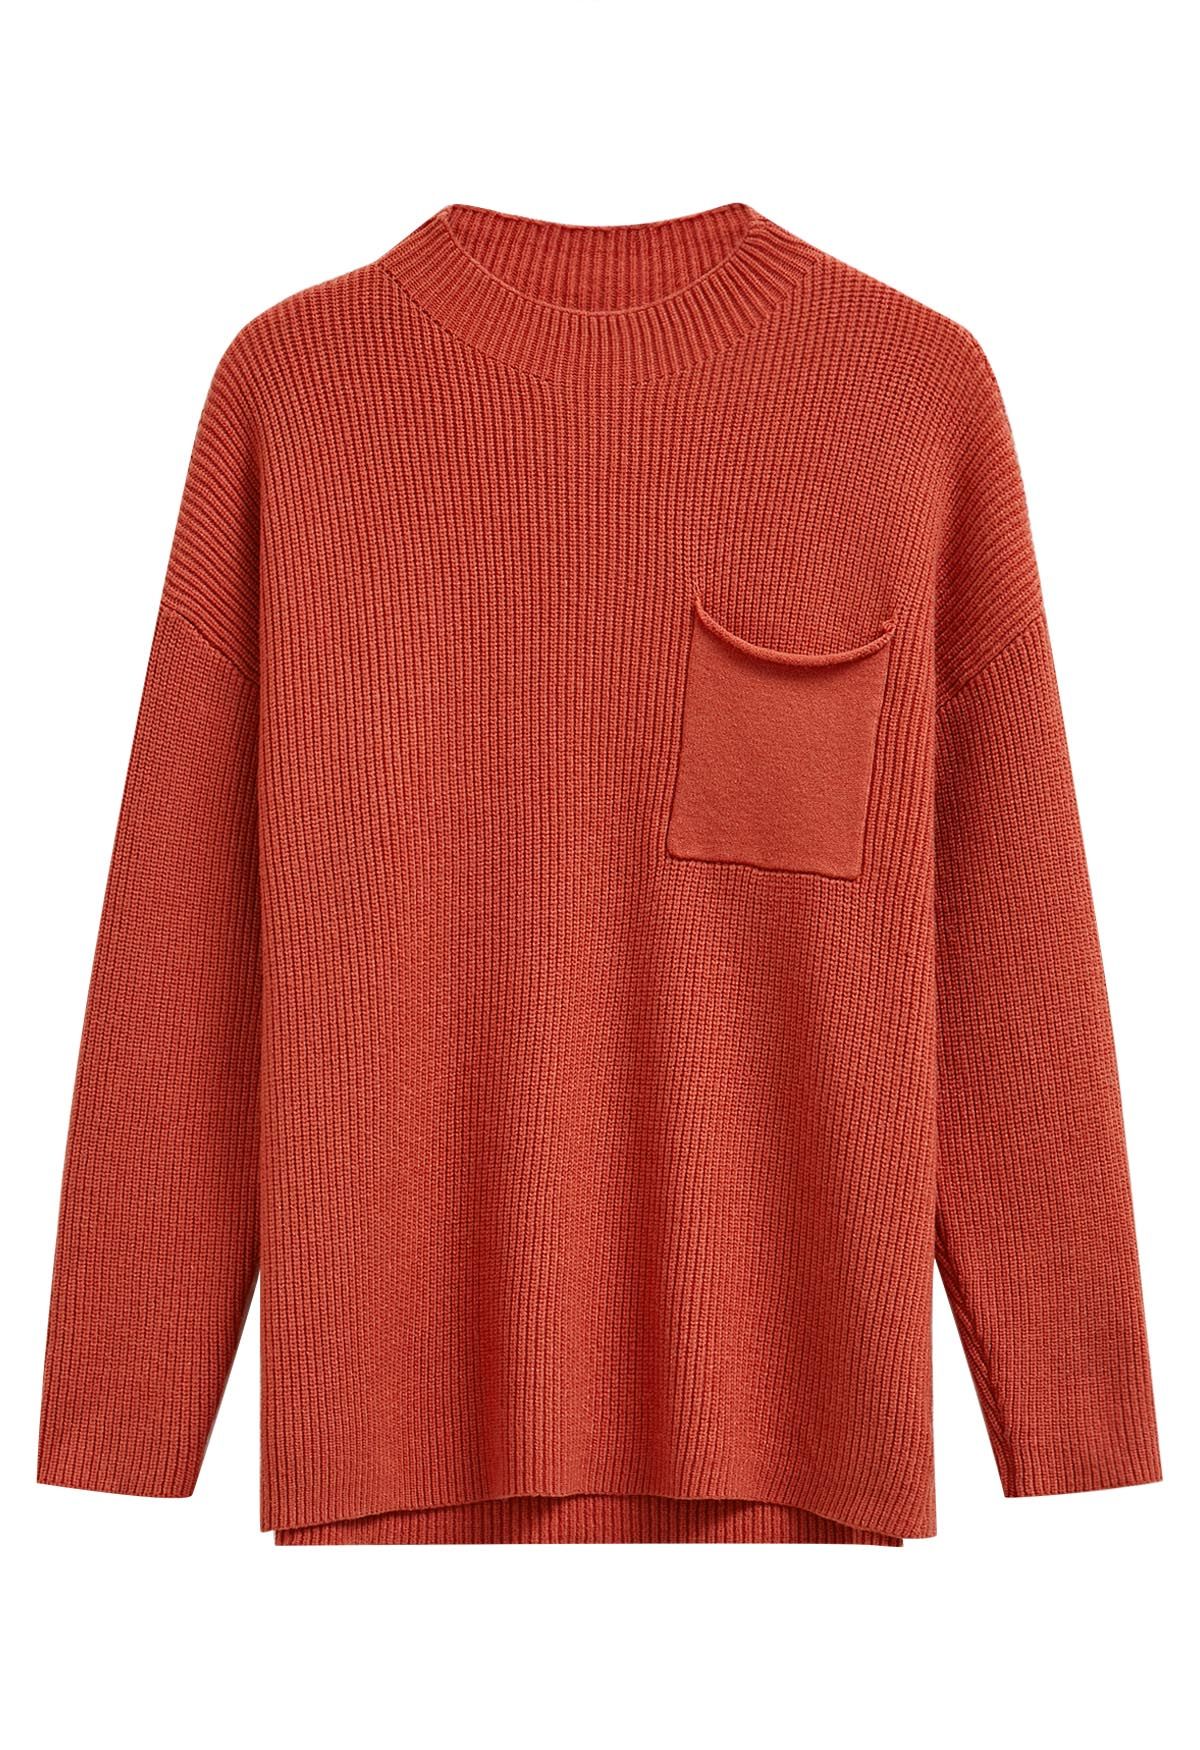 Patch Pocket Ribbed Knit Sweater in Rust Red